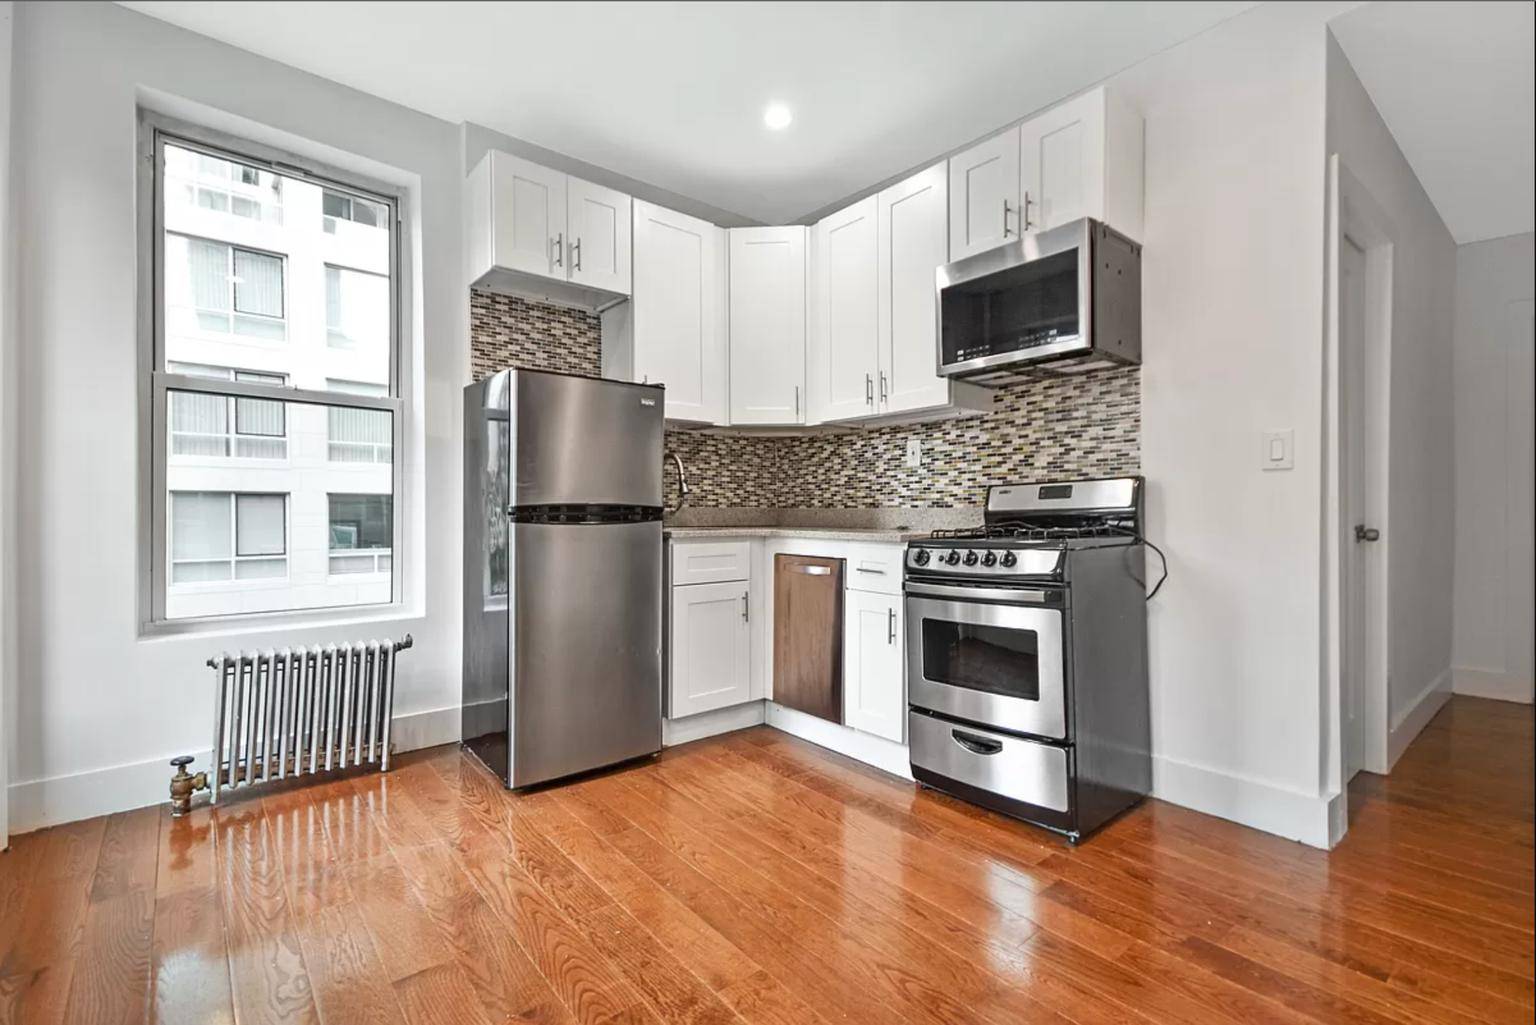 INQUIRE FOR VIDEO AVAILABLE STARTING JUNE 21ST ABOUT THE APARTMENT Gut Renovated, Bright 3 Bedroom, Exposed Brick, New Hard Wood Floors Throughout, Washer and Dryer In Unit, Recessed Lighting, West ...